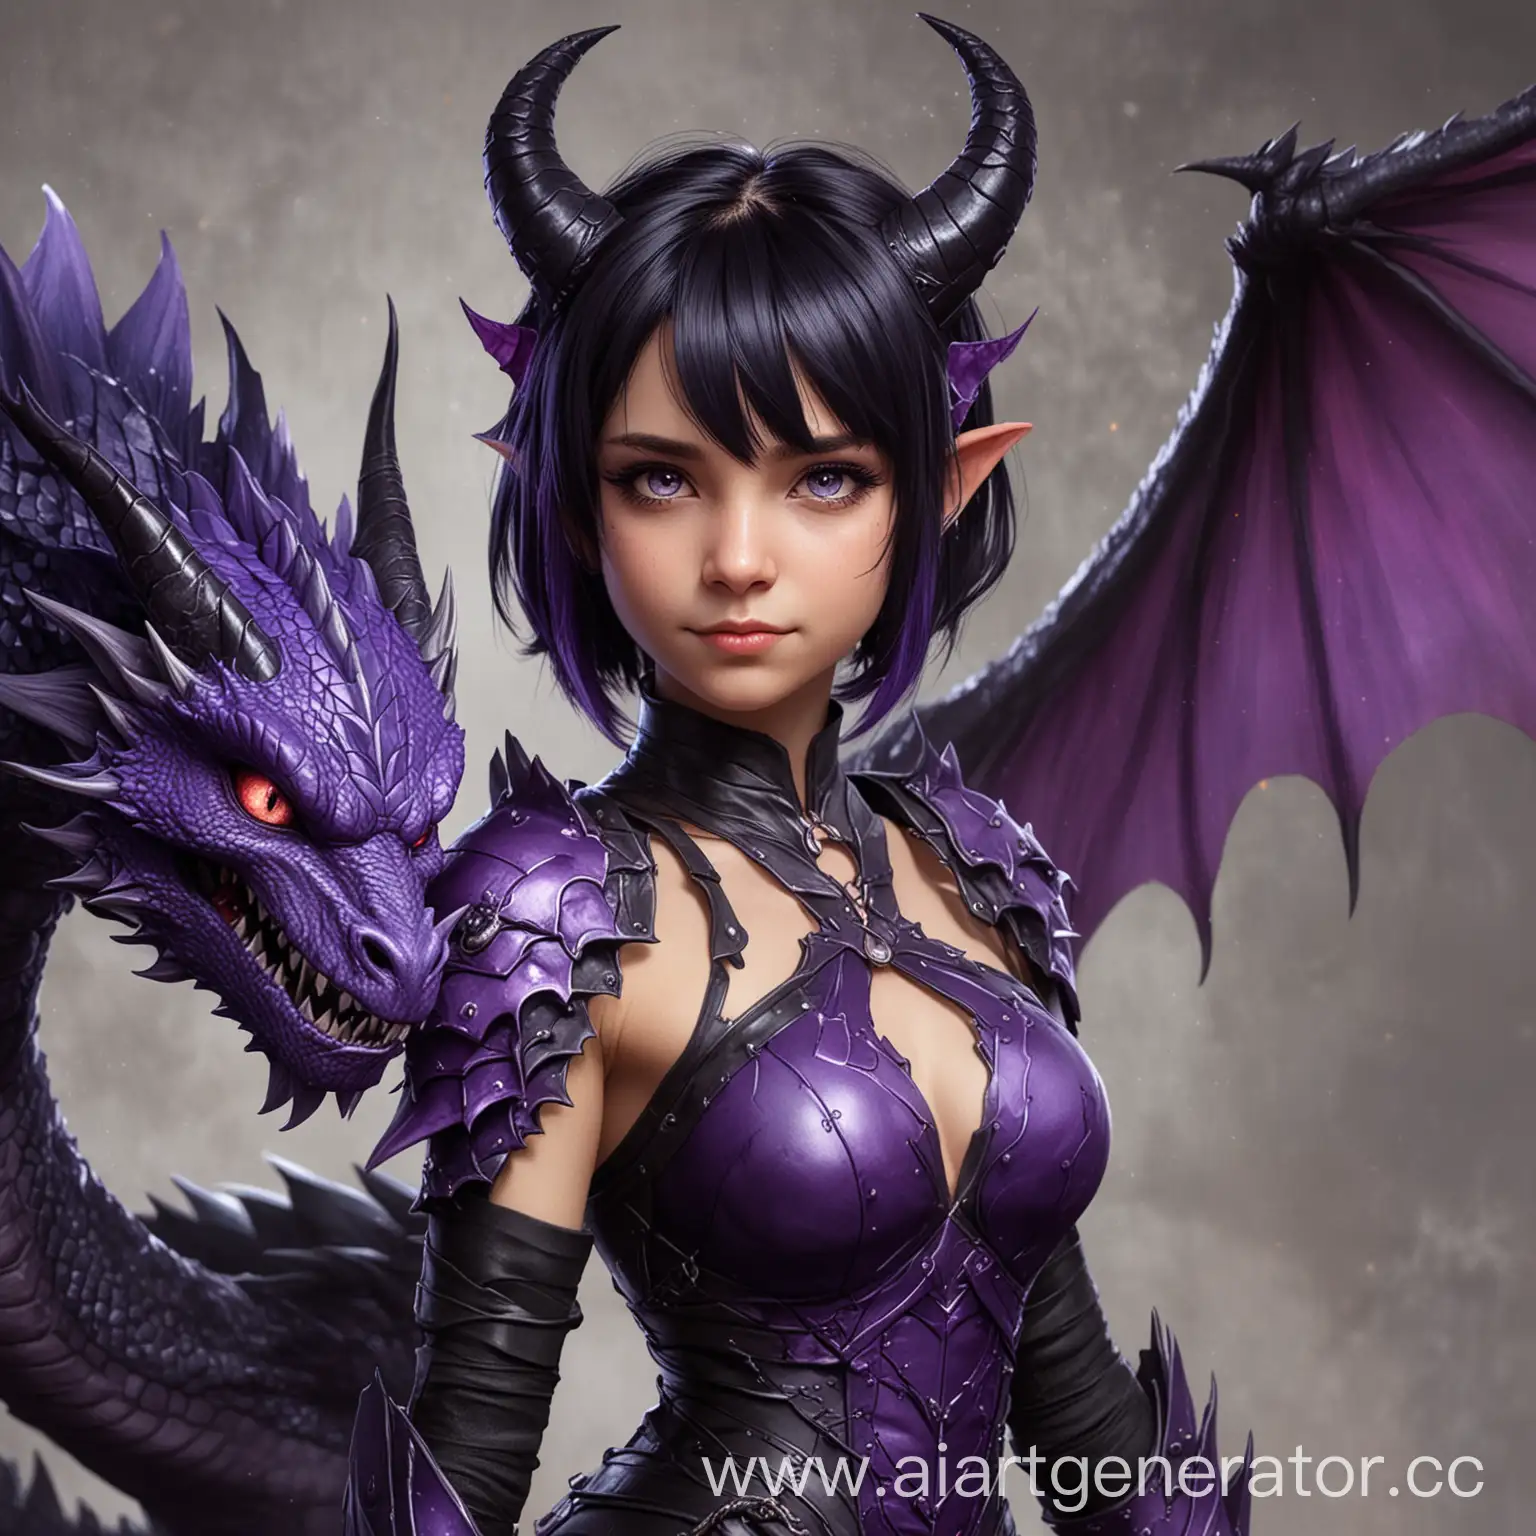 Dragon-Girl-with-Short-Black-Hair-Purple-Horns-and-Tail